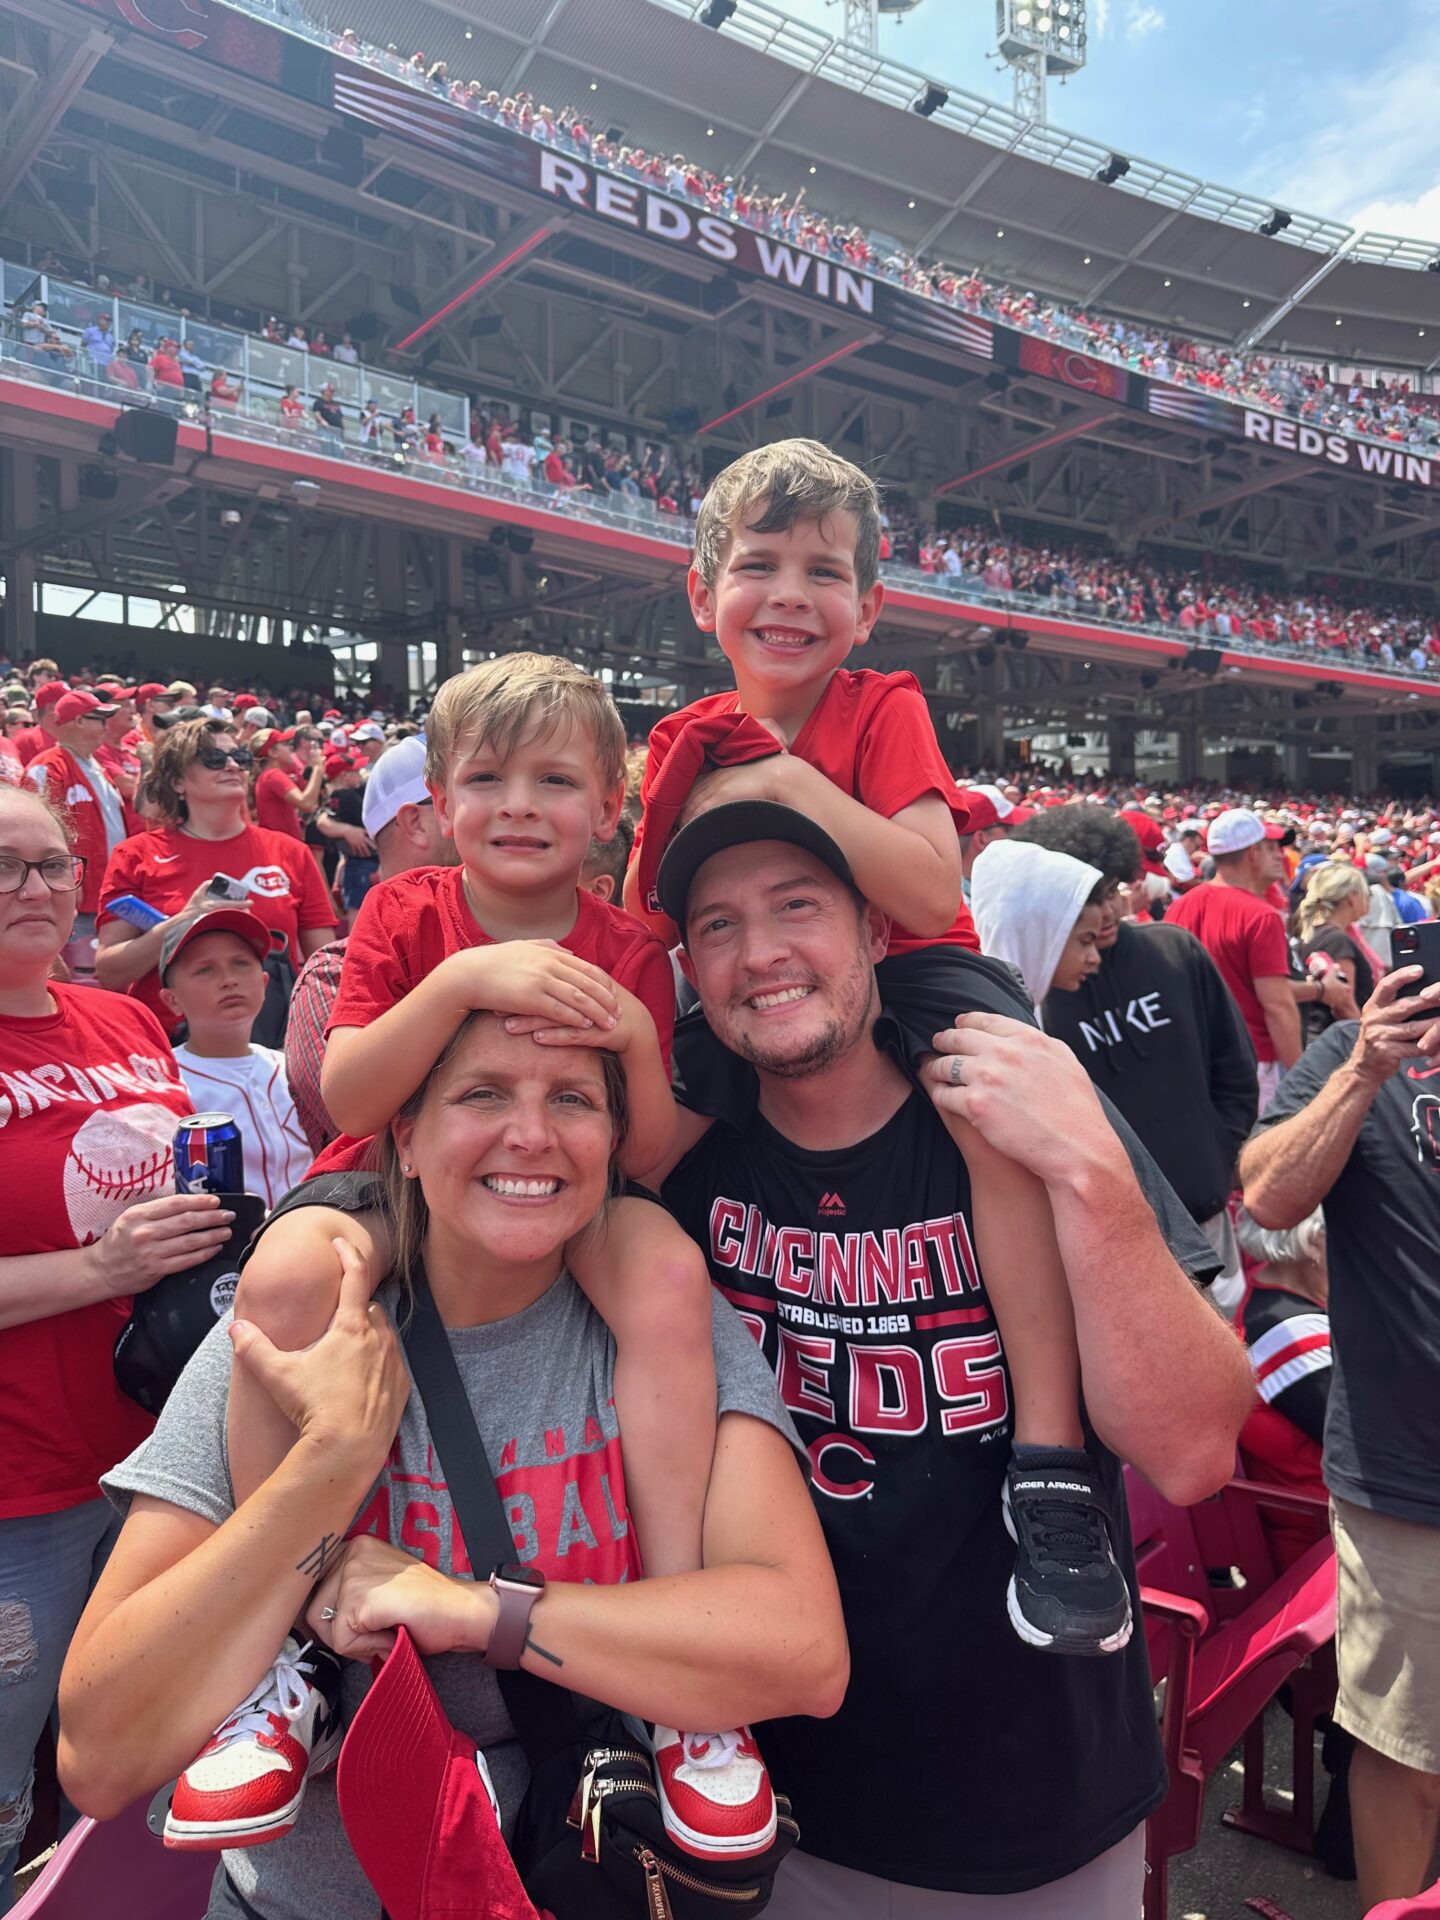 Kyle Wilson and his family at a Cincinnati Reds baseball game.